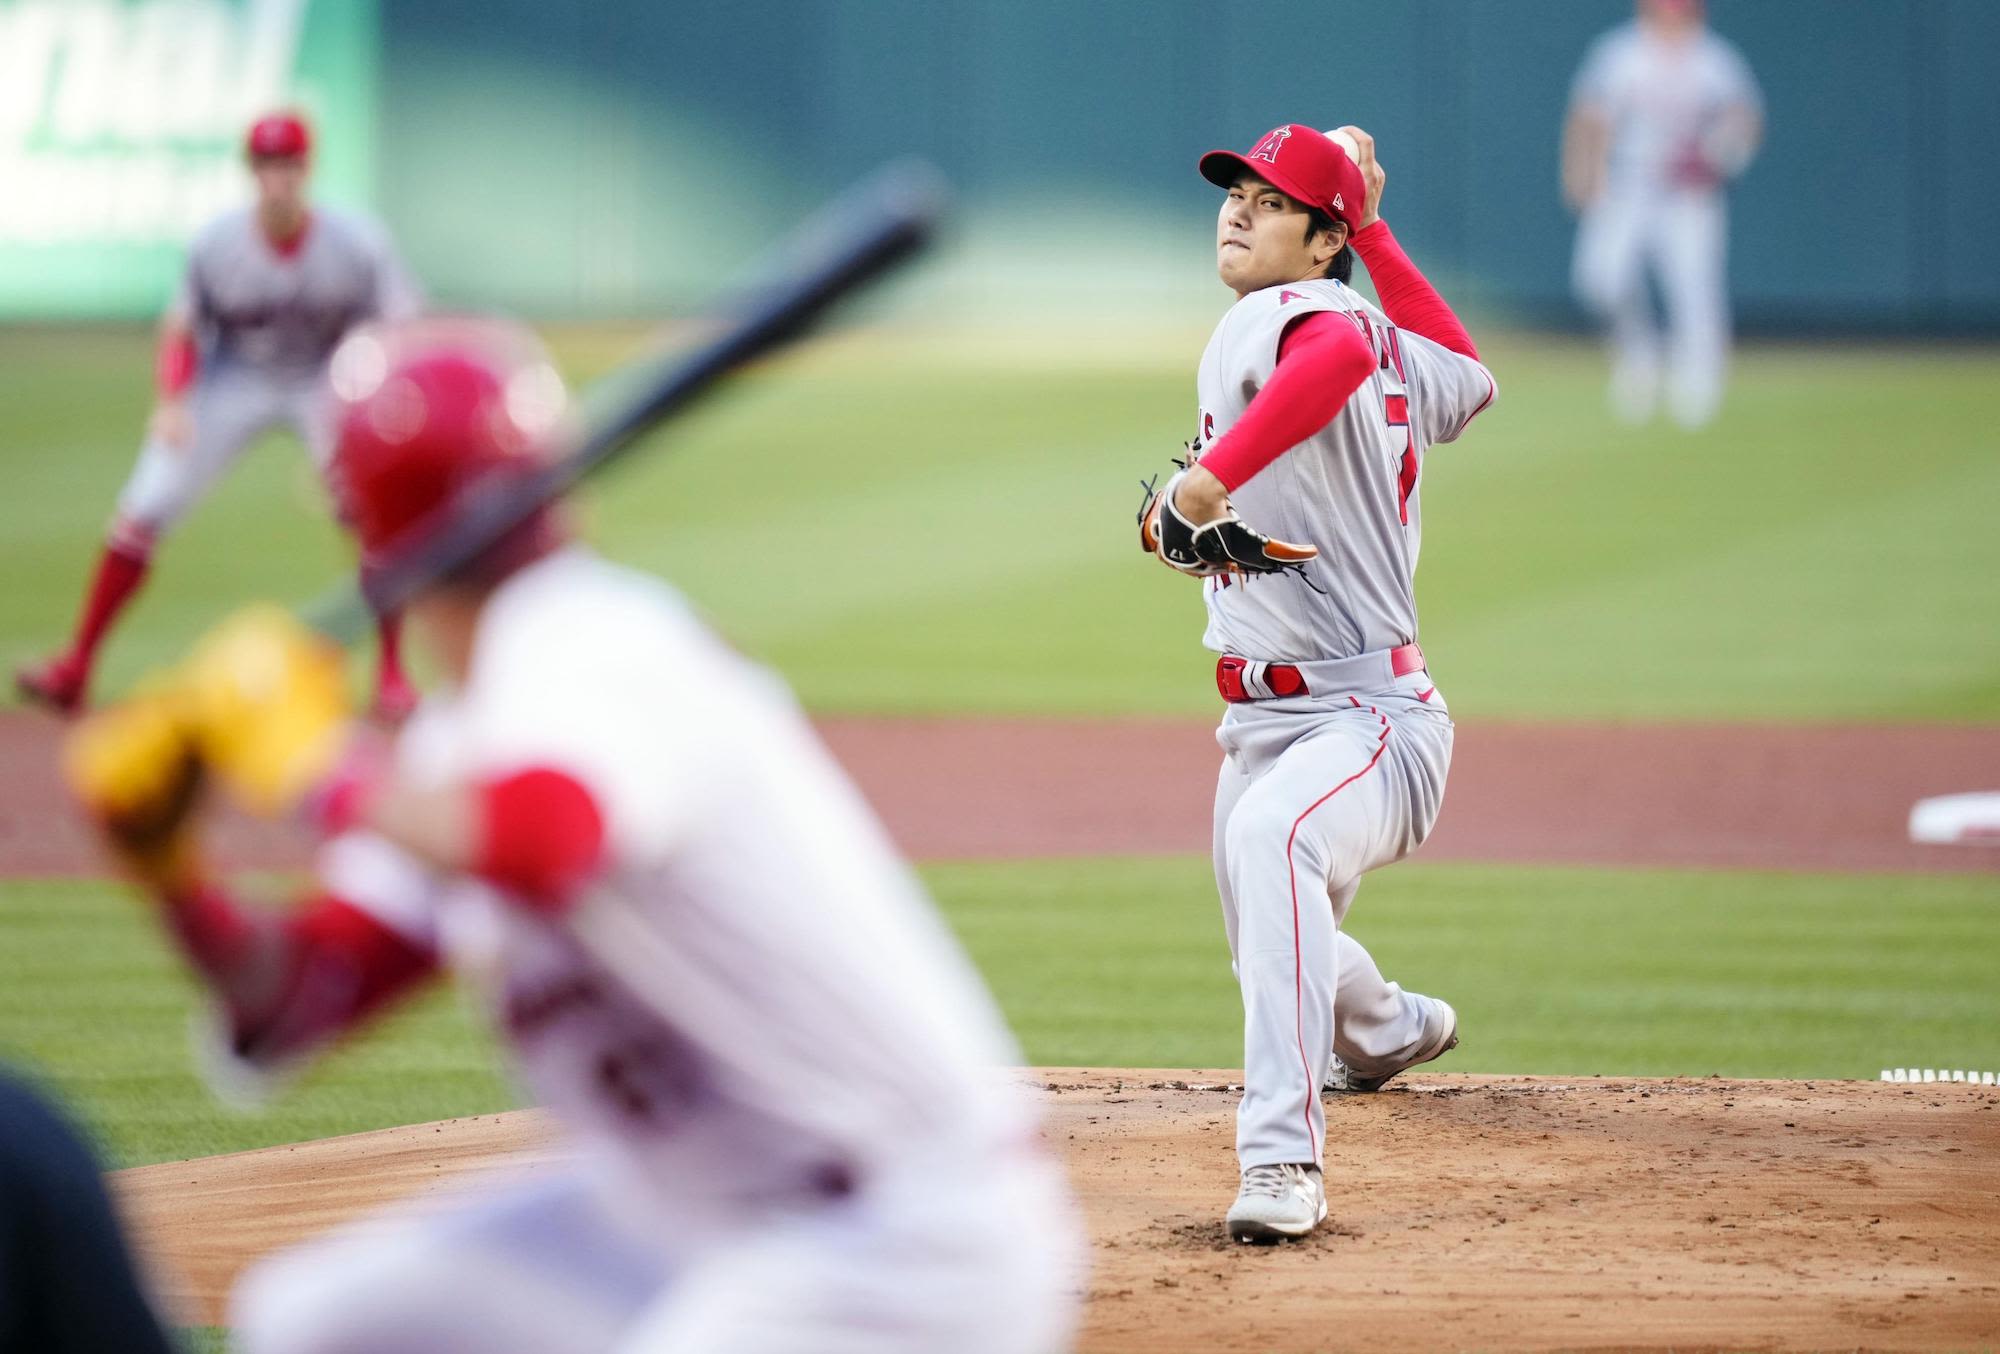 Enjoy Shohei Ohtani's historic MLB season with the Angels with new